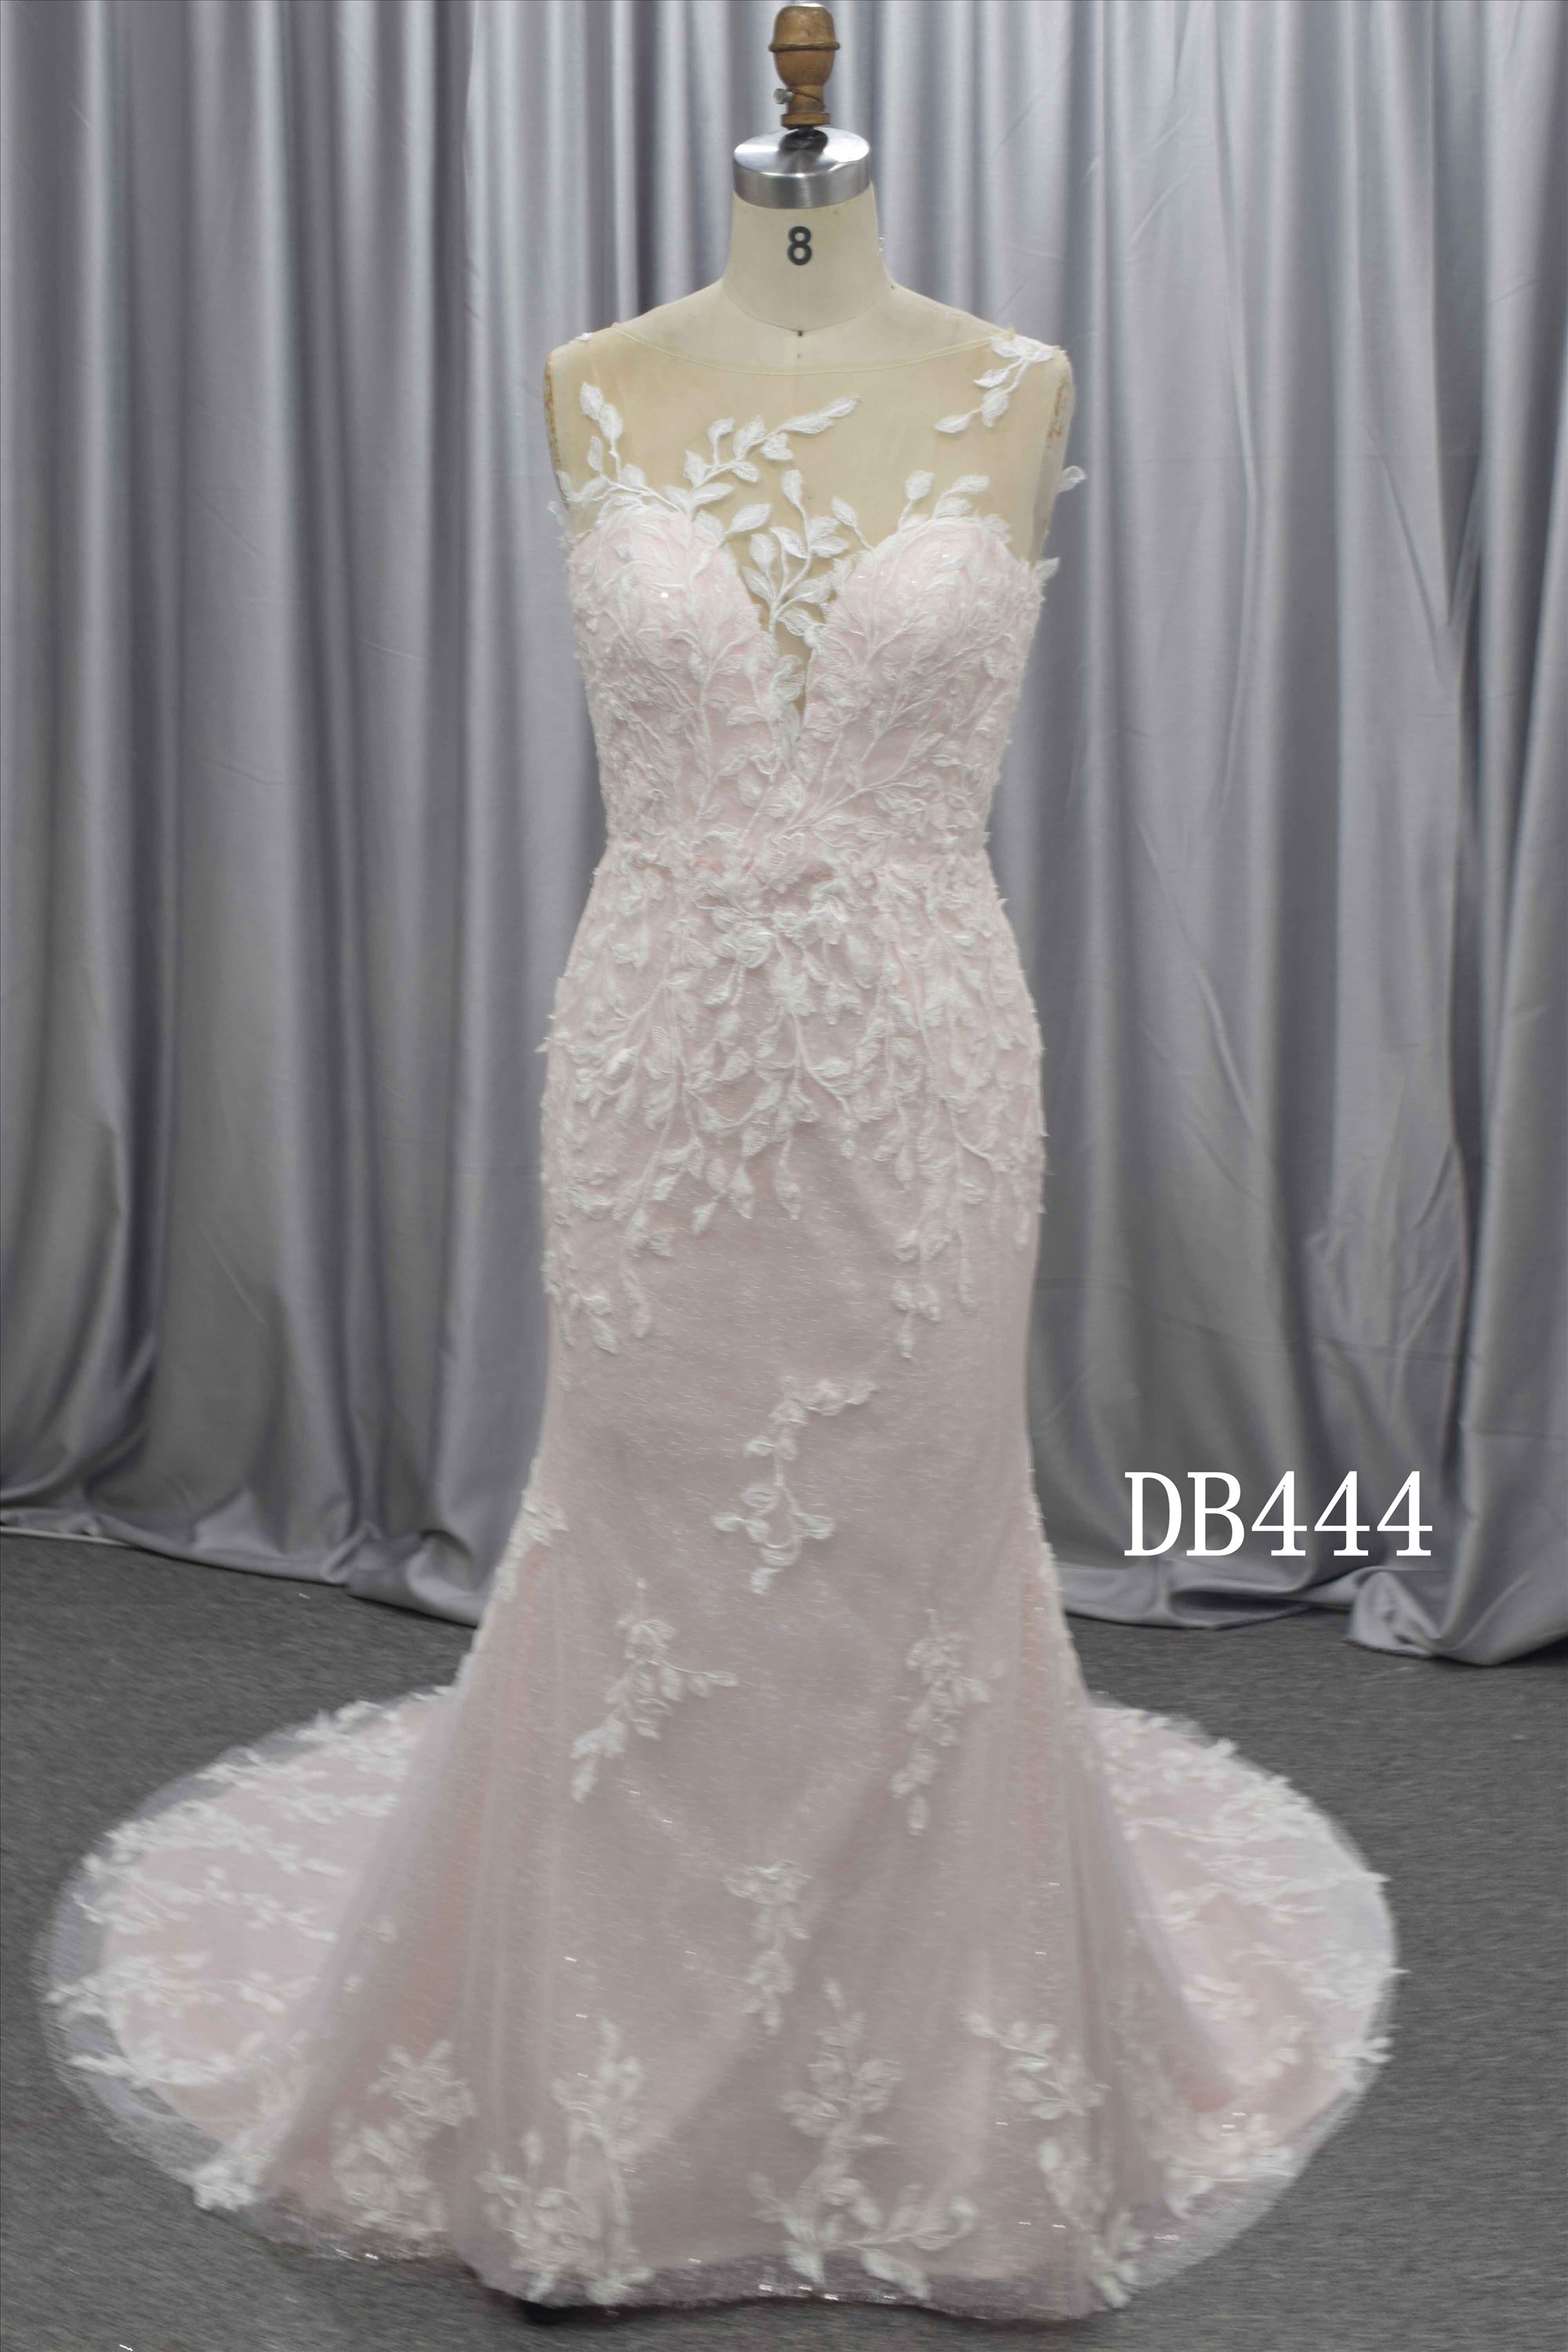 Soft blush color mermaid bridal gown with nice lace